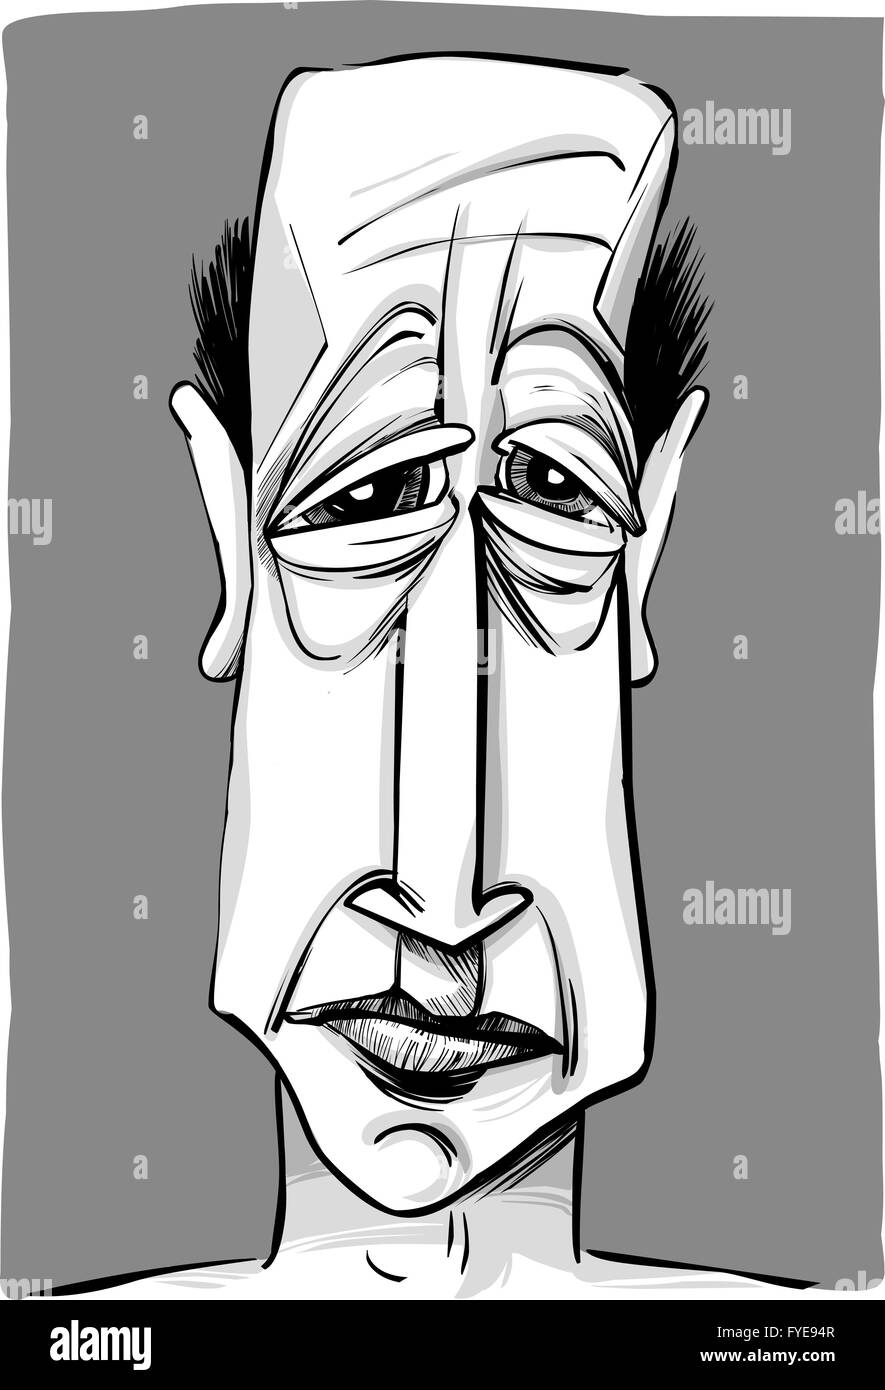 Man Caricature High Resolution Stock Photography And Images Alamy